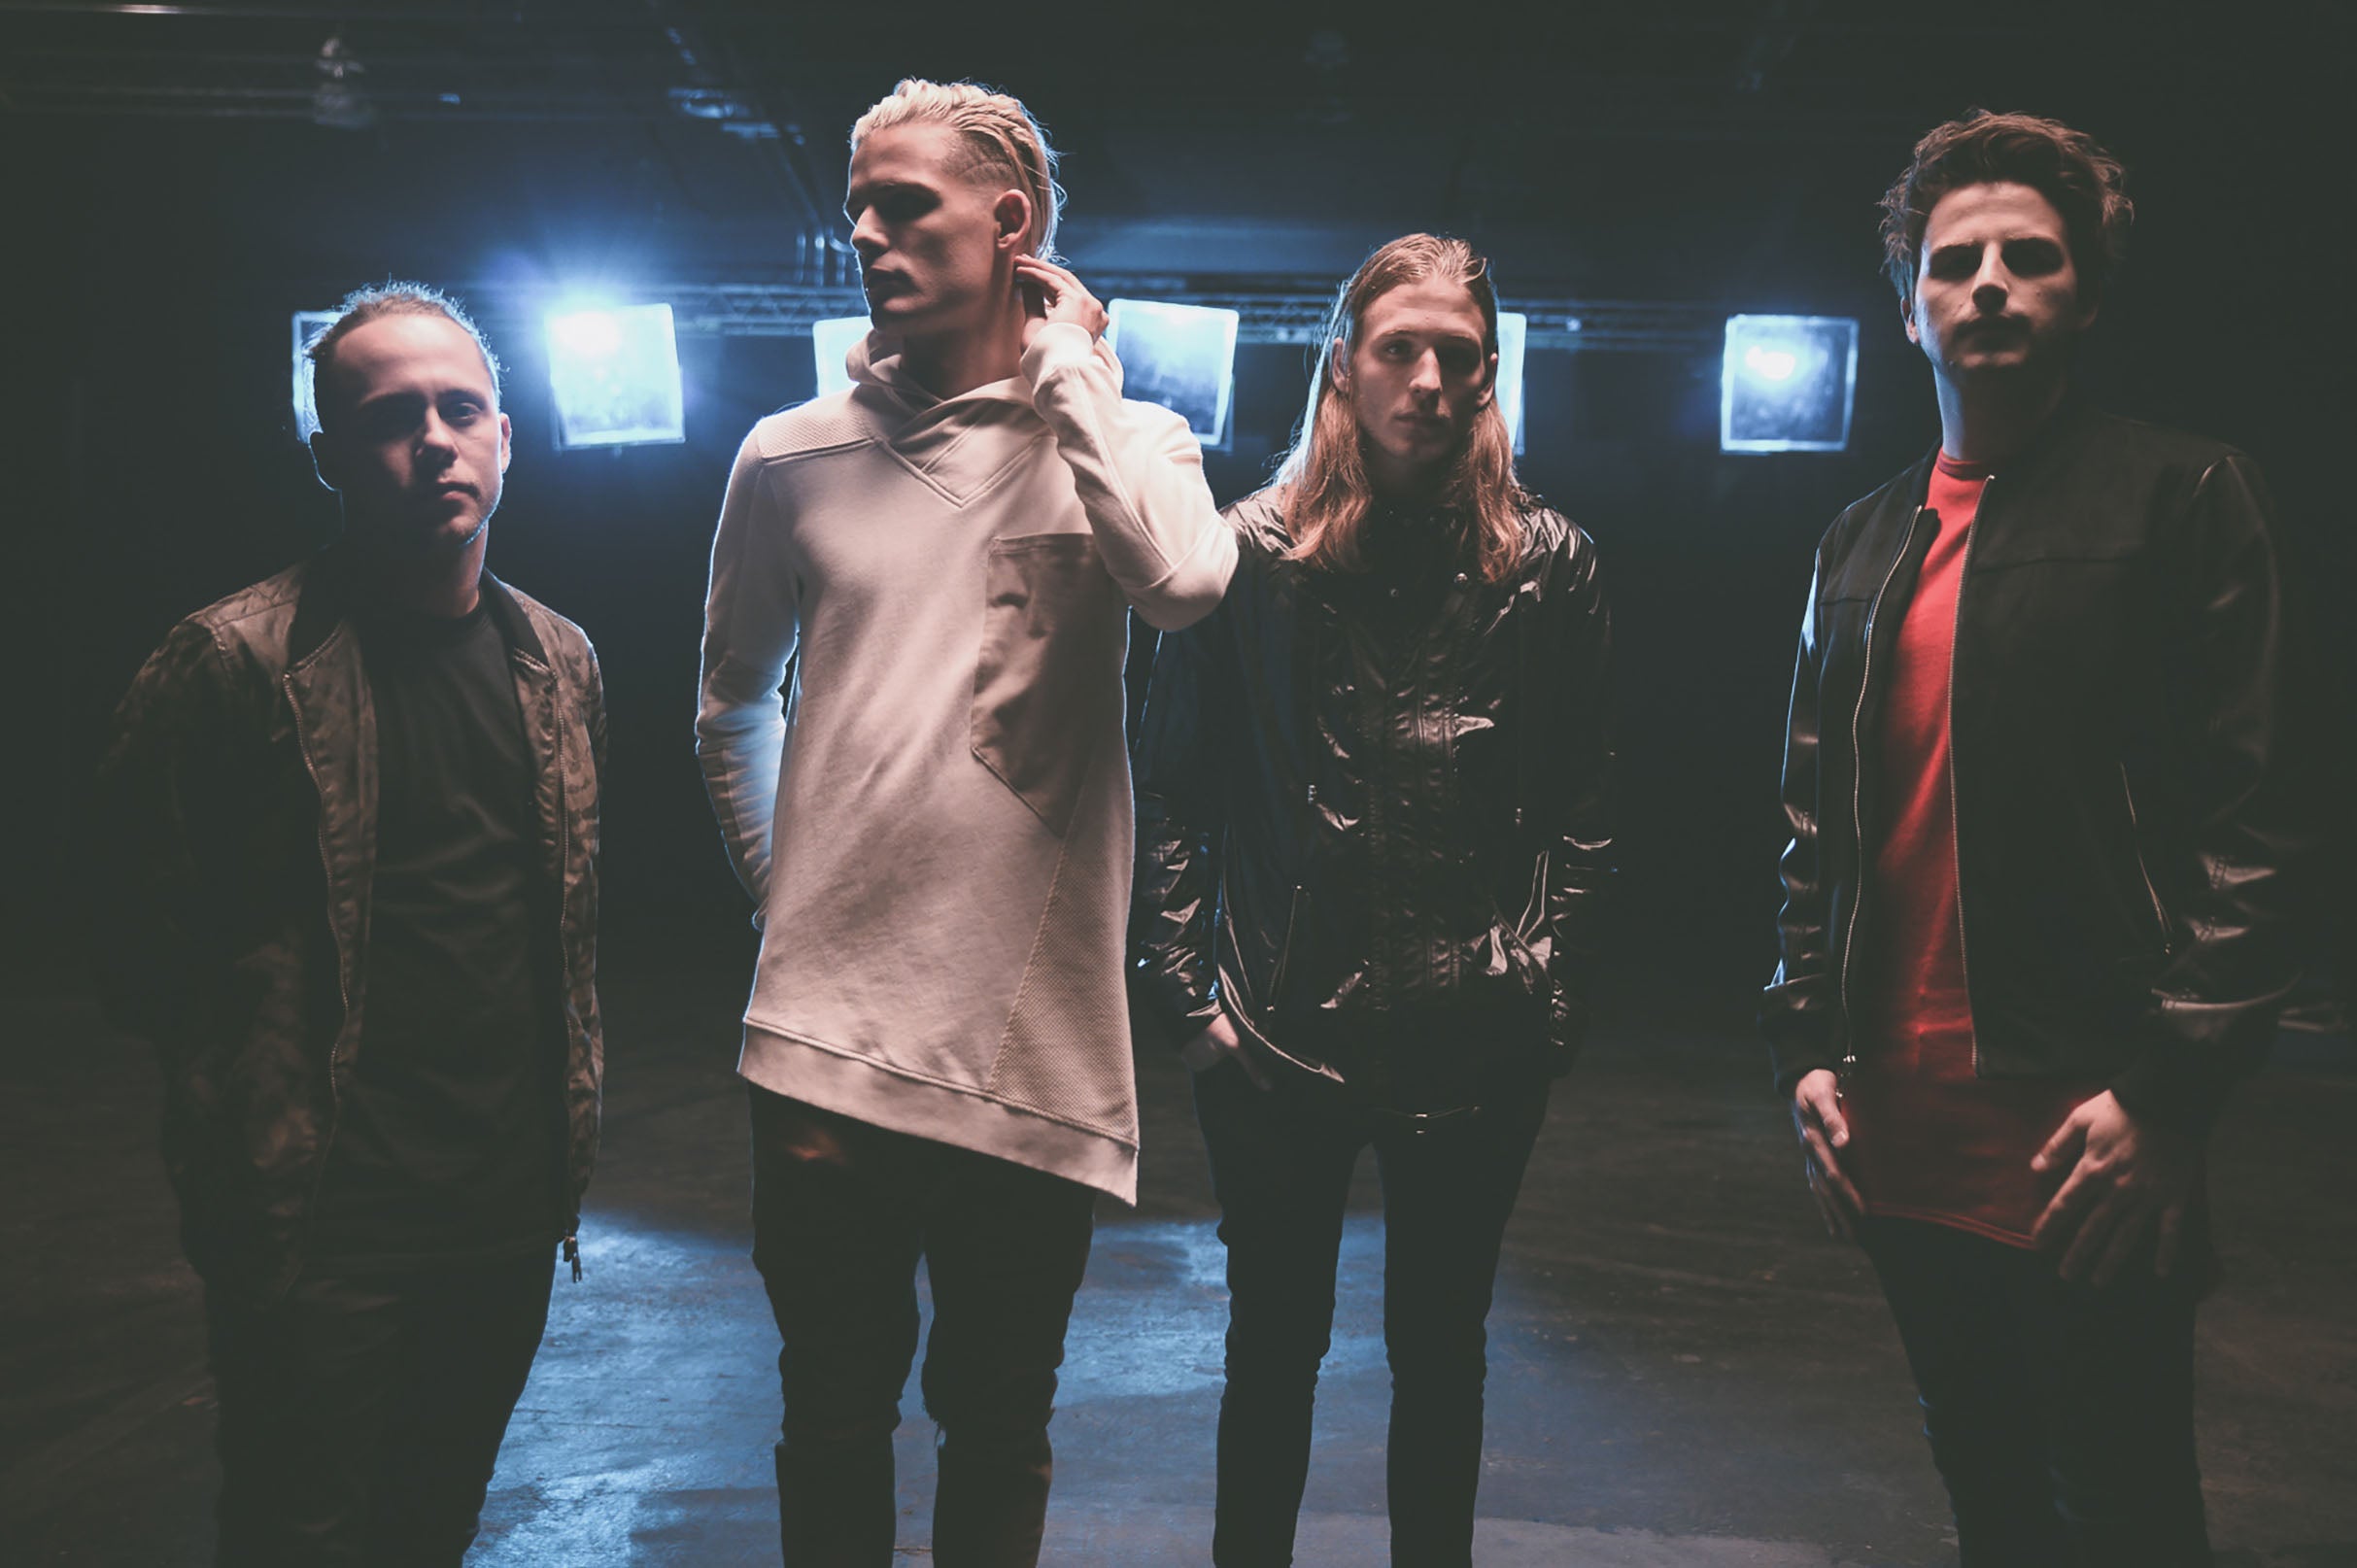 I See Stars presale code for event tickets in Madison, WI (Majestic Theatre)